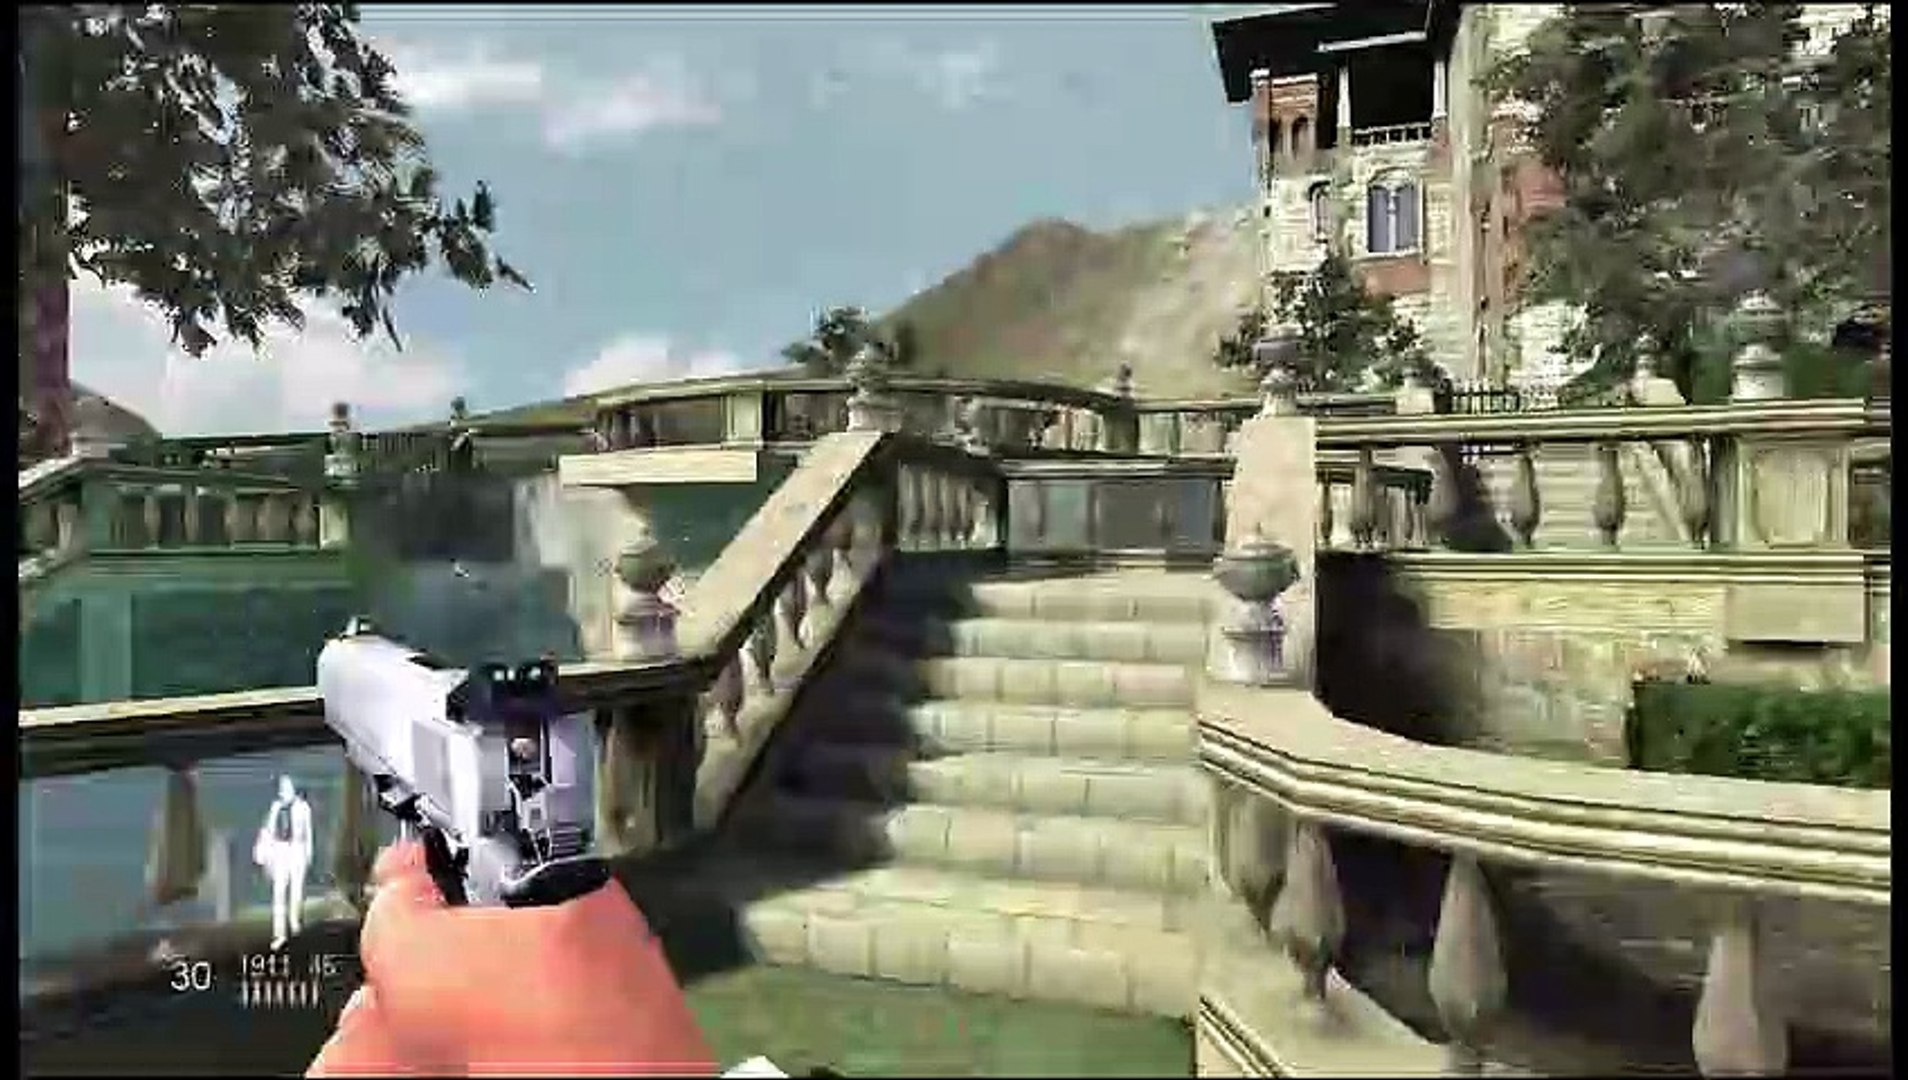 007: Quantum of Solace online multiplayer - wii - Vidéo Dailymotion